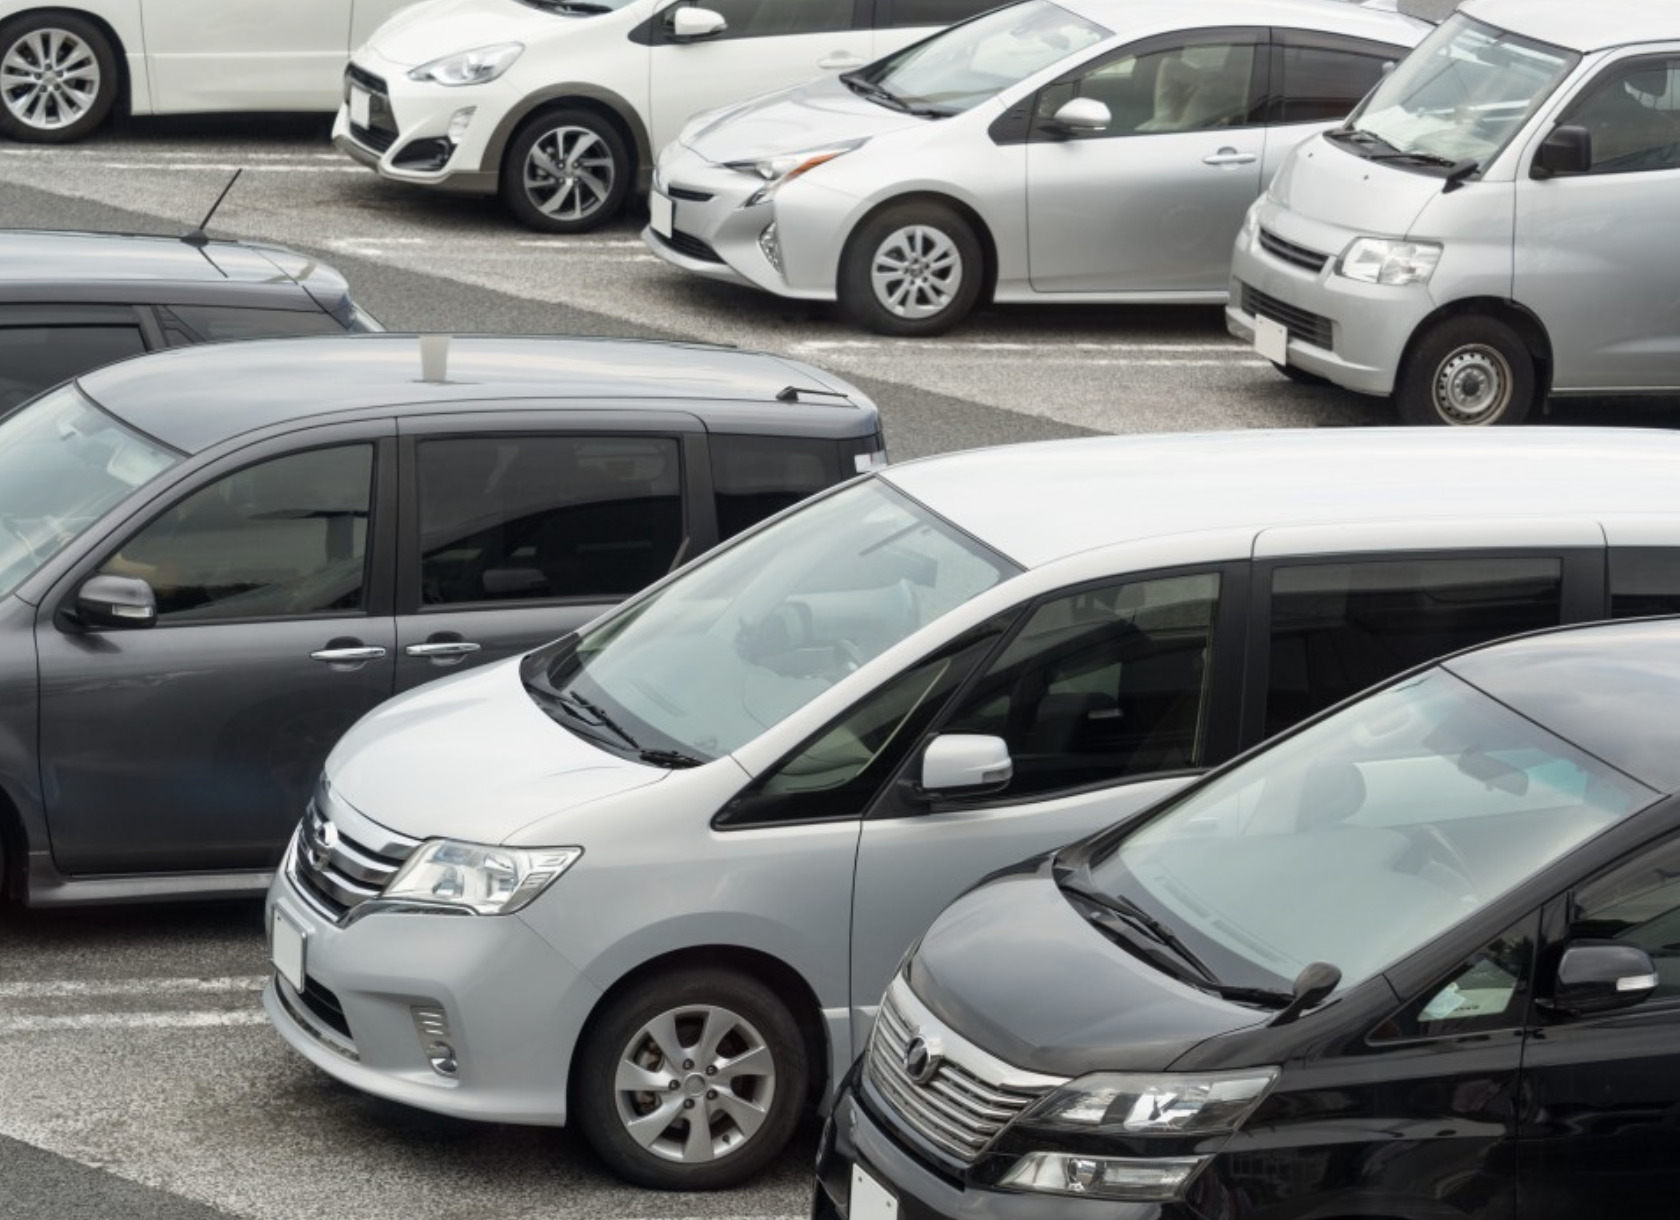 Why Back-Parking is Common in Japan